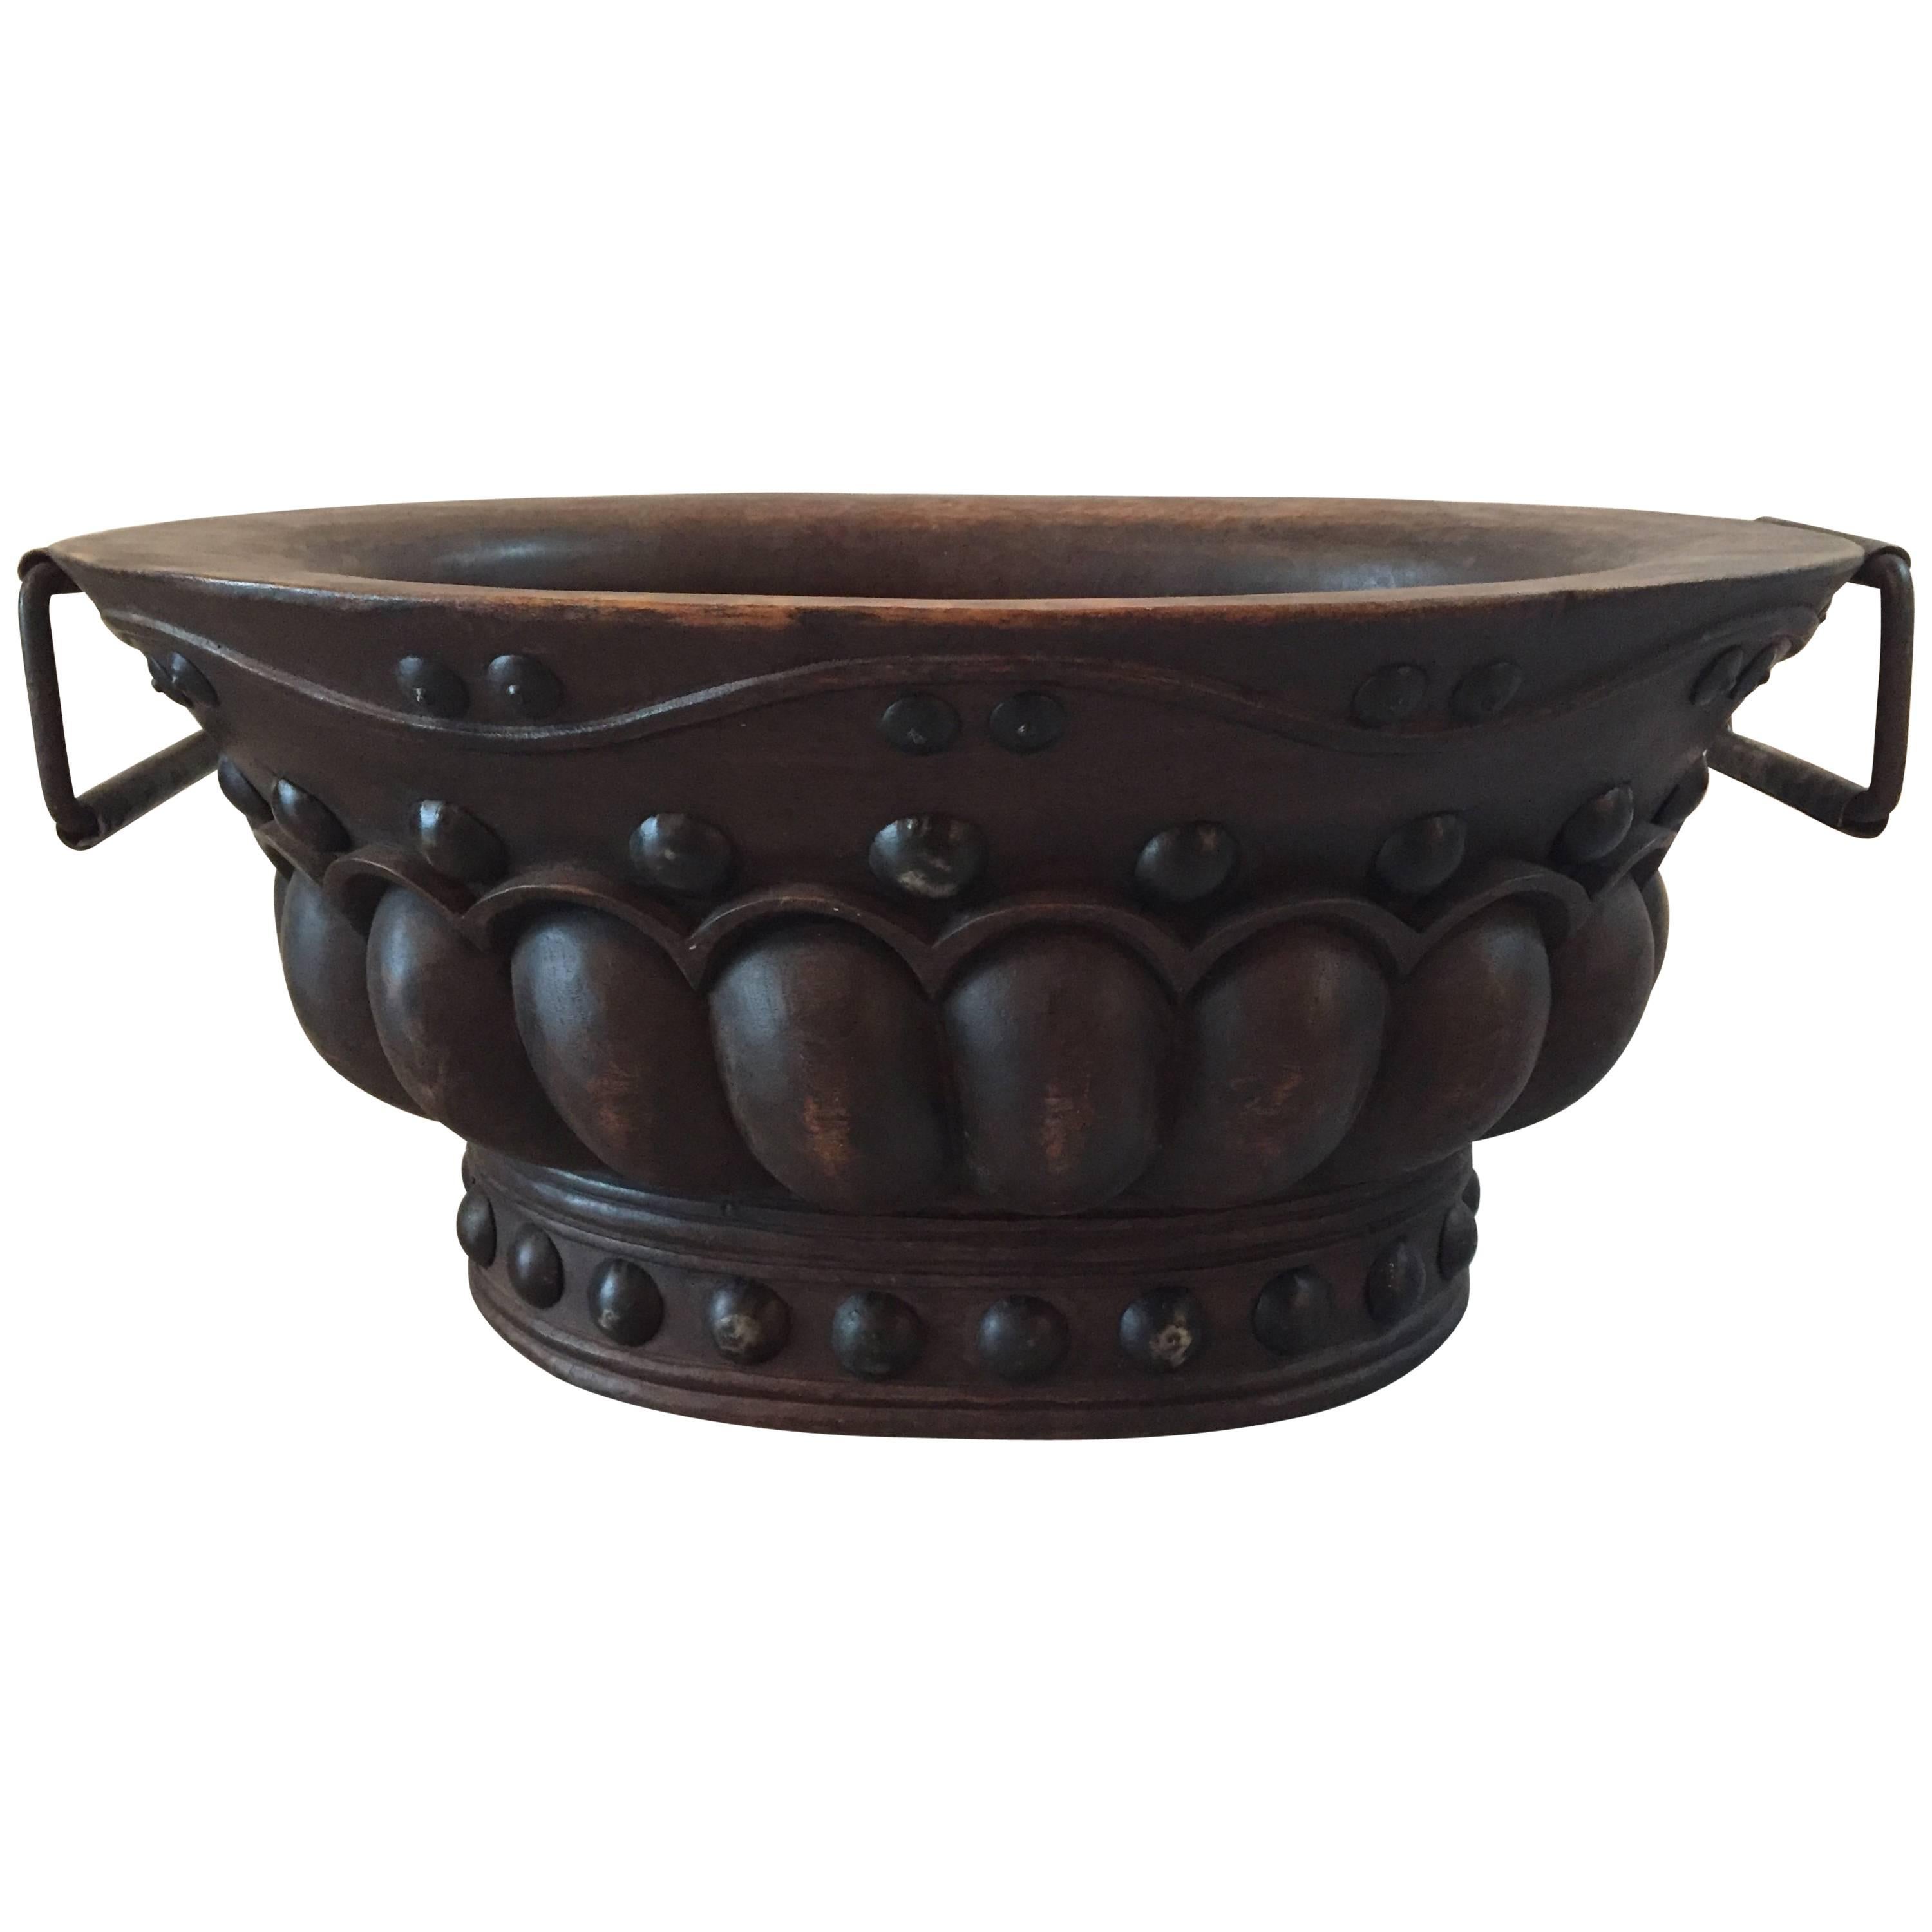 Wonderfully Decorative Hand-Carved Oval Wooden Indonesian Bowl